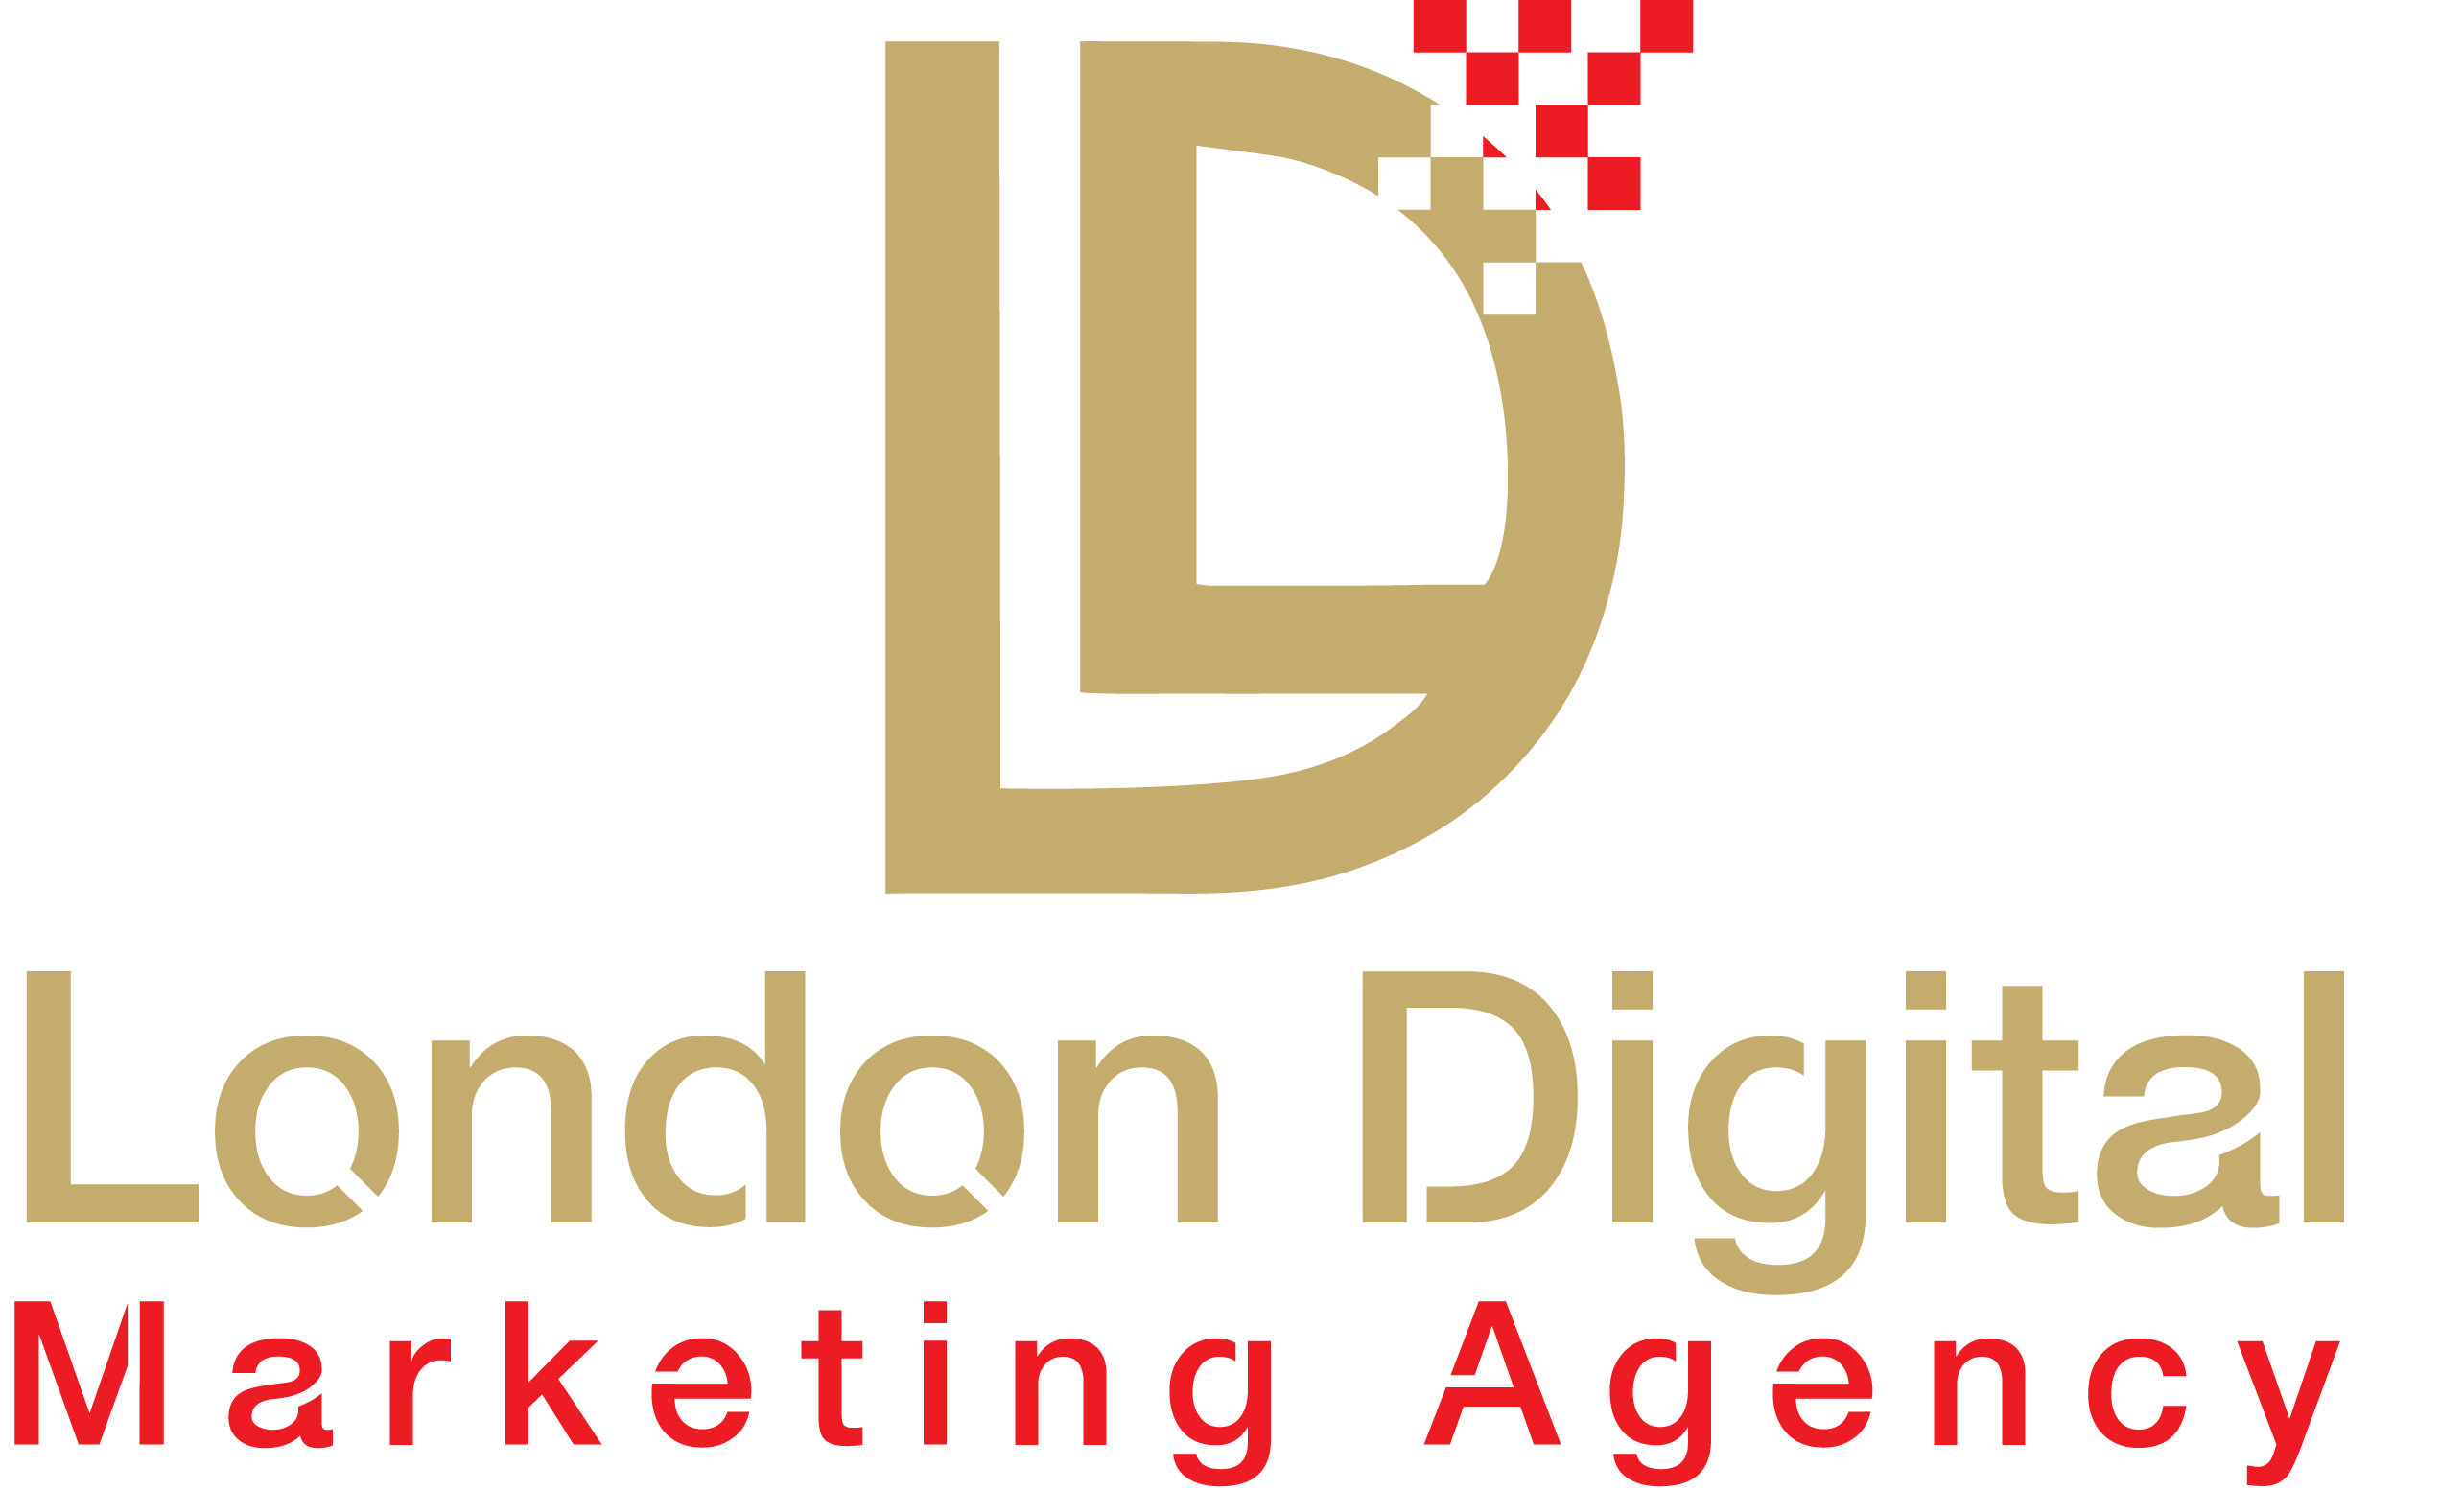 Contact with London Digital Marketing Agency